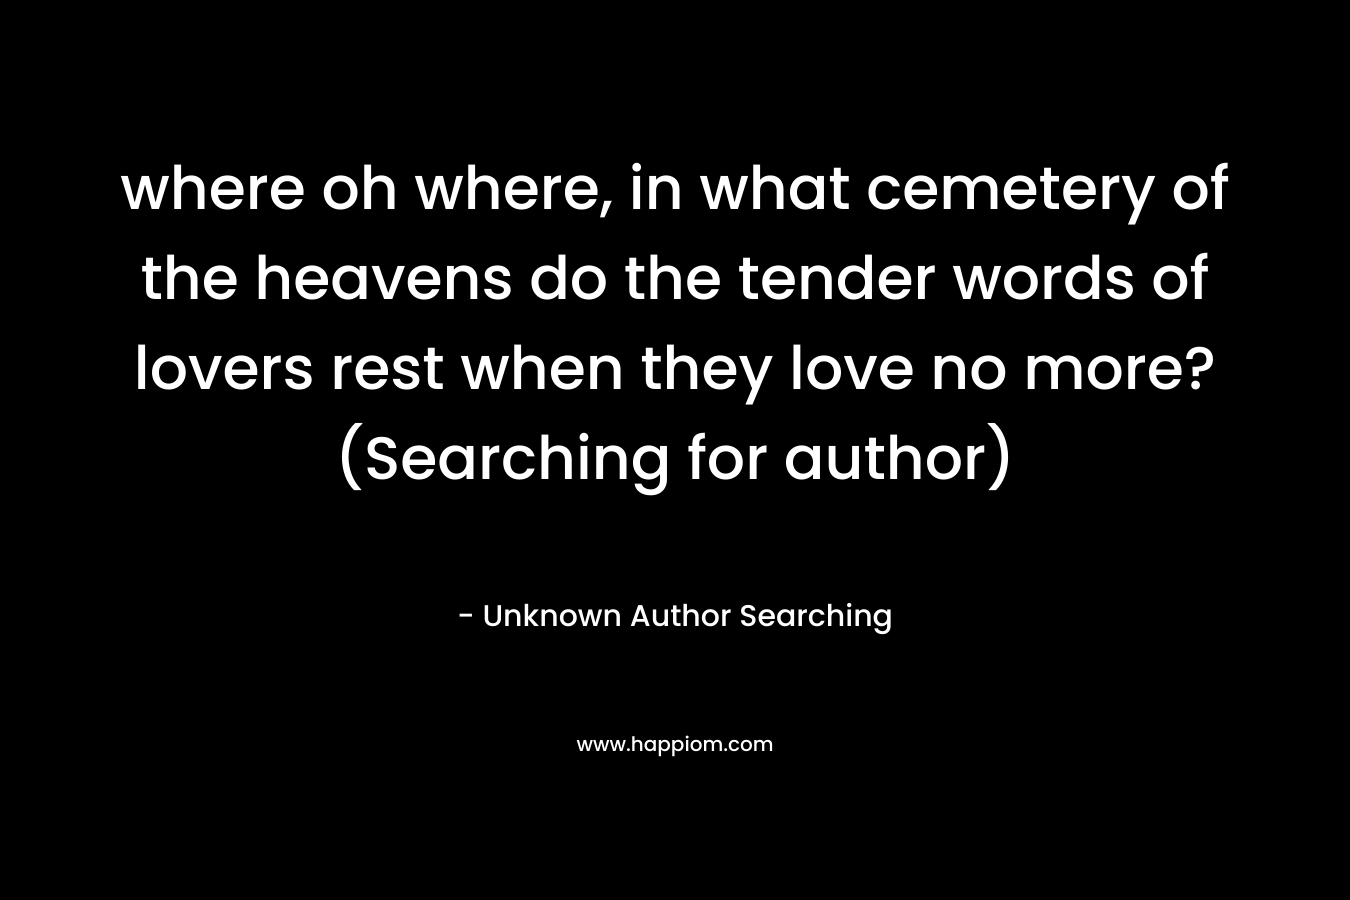 where oh where, in what cemetery of the heavens do the tender words of lovers rest when they love no more? (Searching for author) – Unknown Author Searching